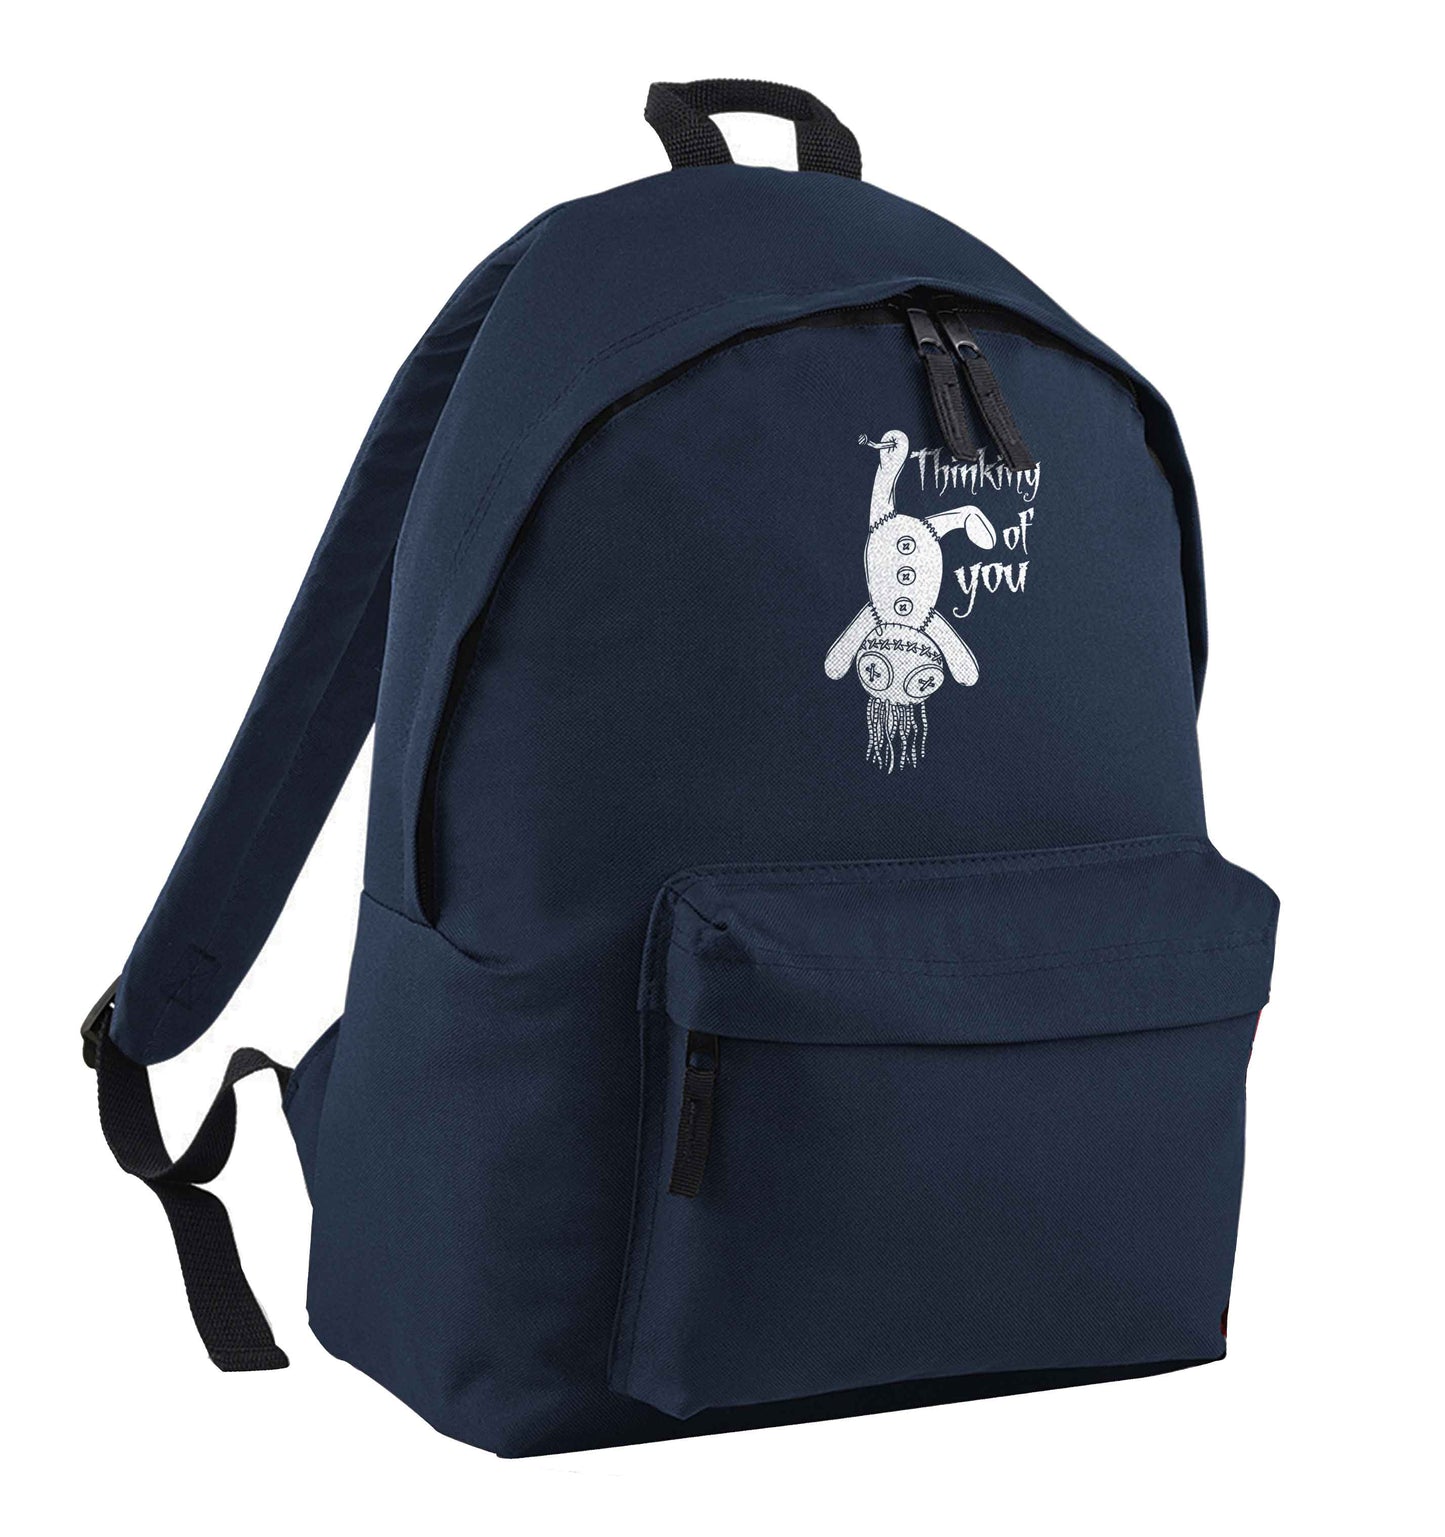 Thinking of you navy adults backpack